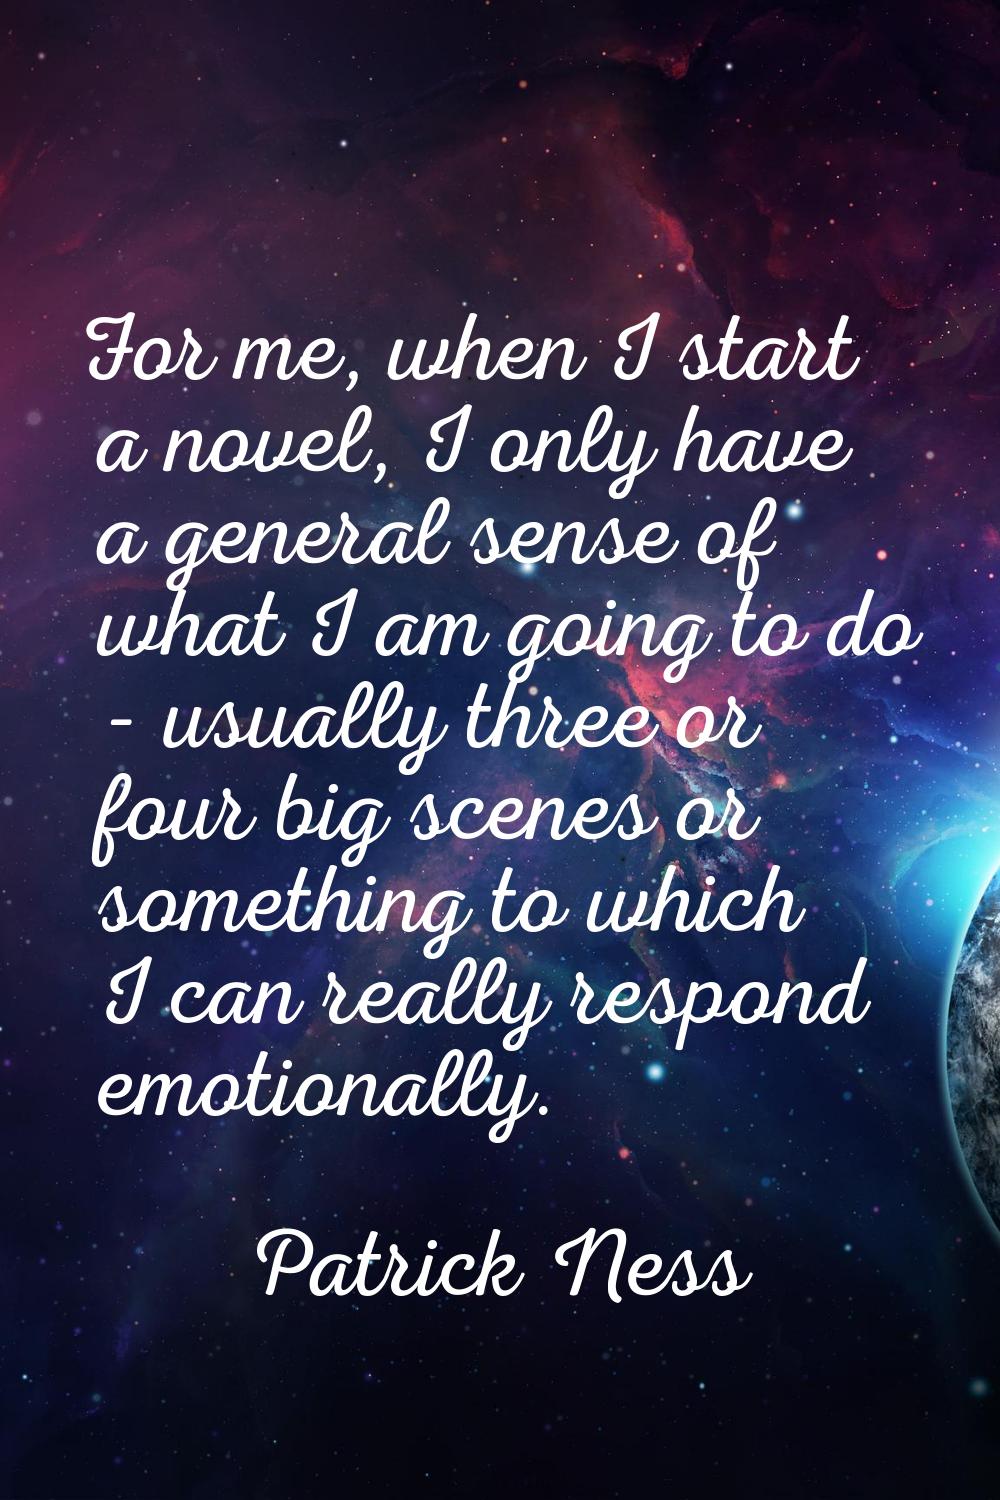 For me, when I start a novel, I only have a general sense of what I am going to do - usually three 